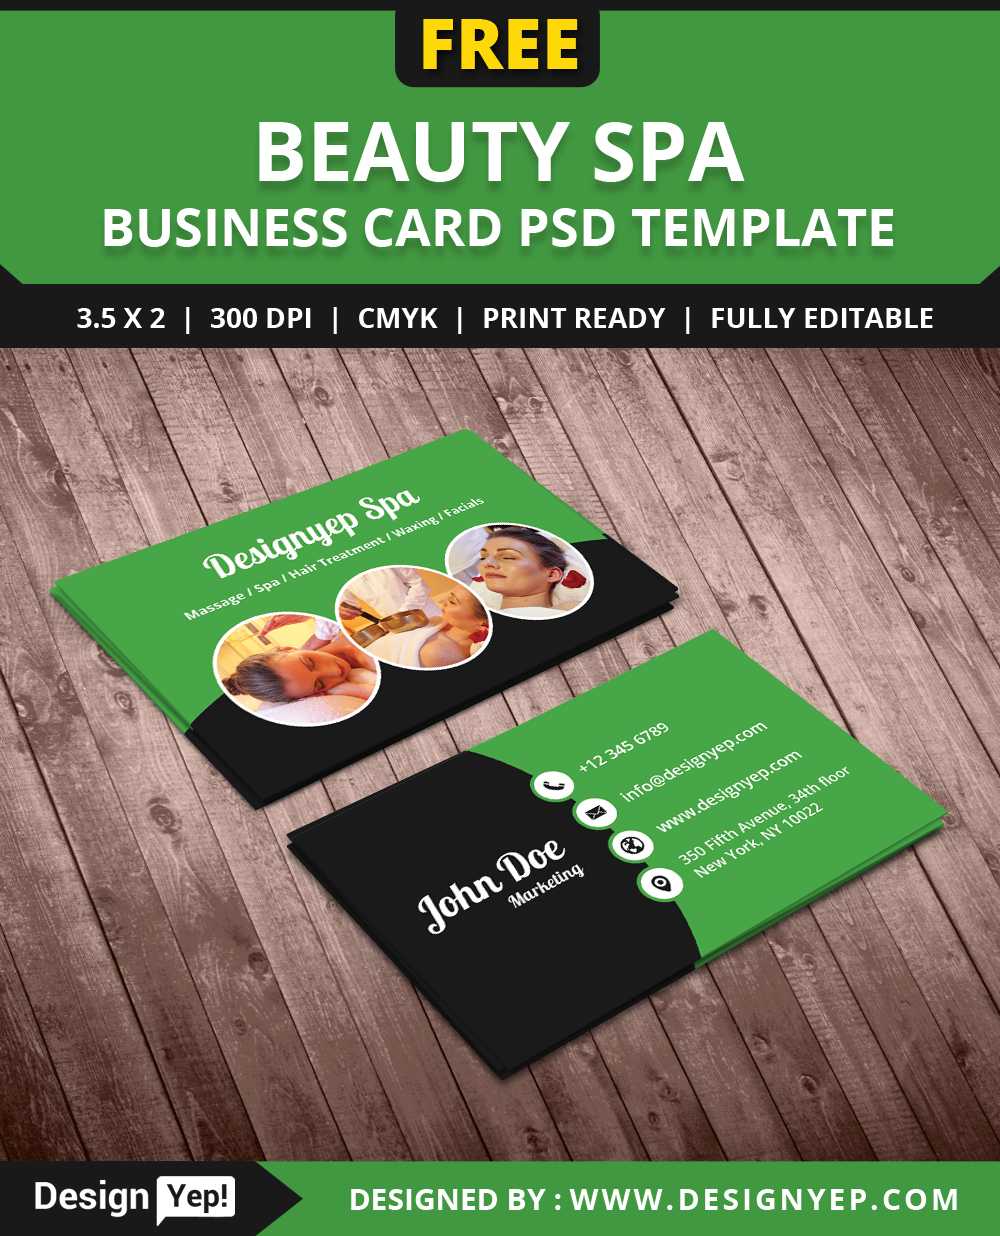 Free Beauty Spa Business Card Psd Template – Designyep With Regard To Massage Therapy Business Card Templates